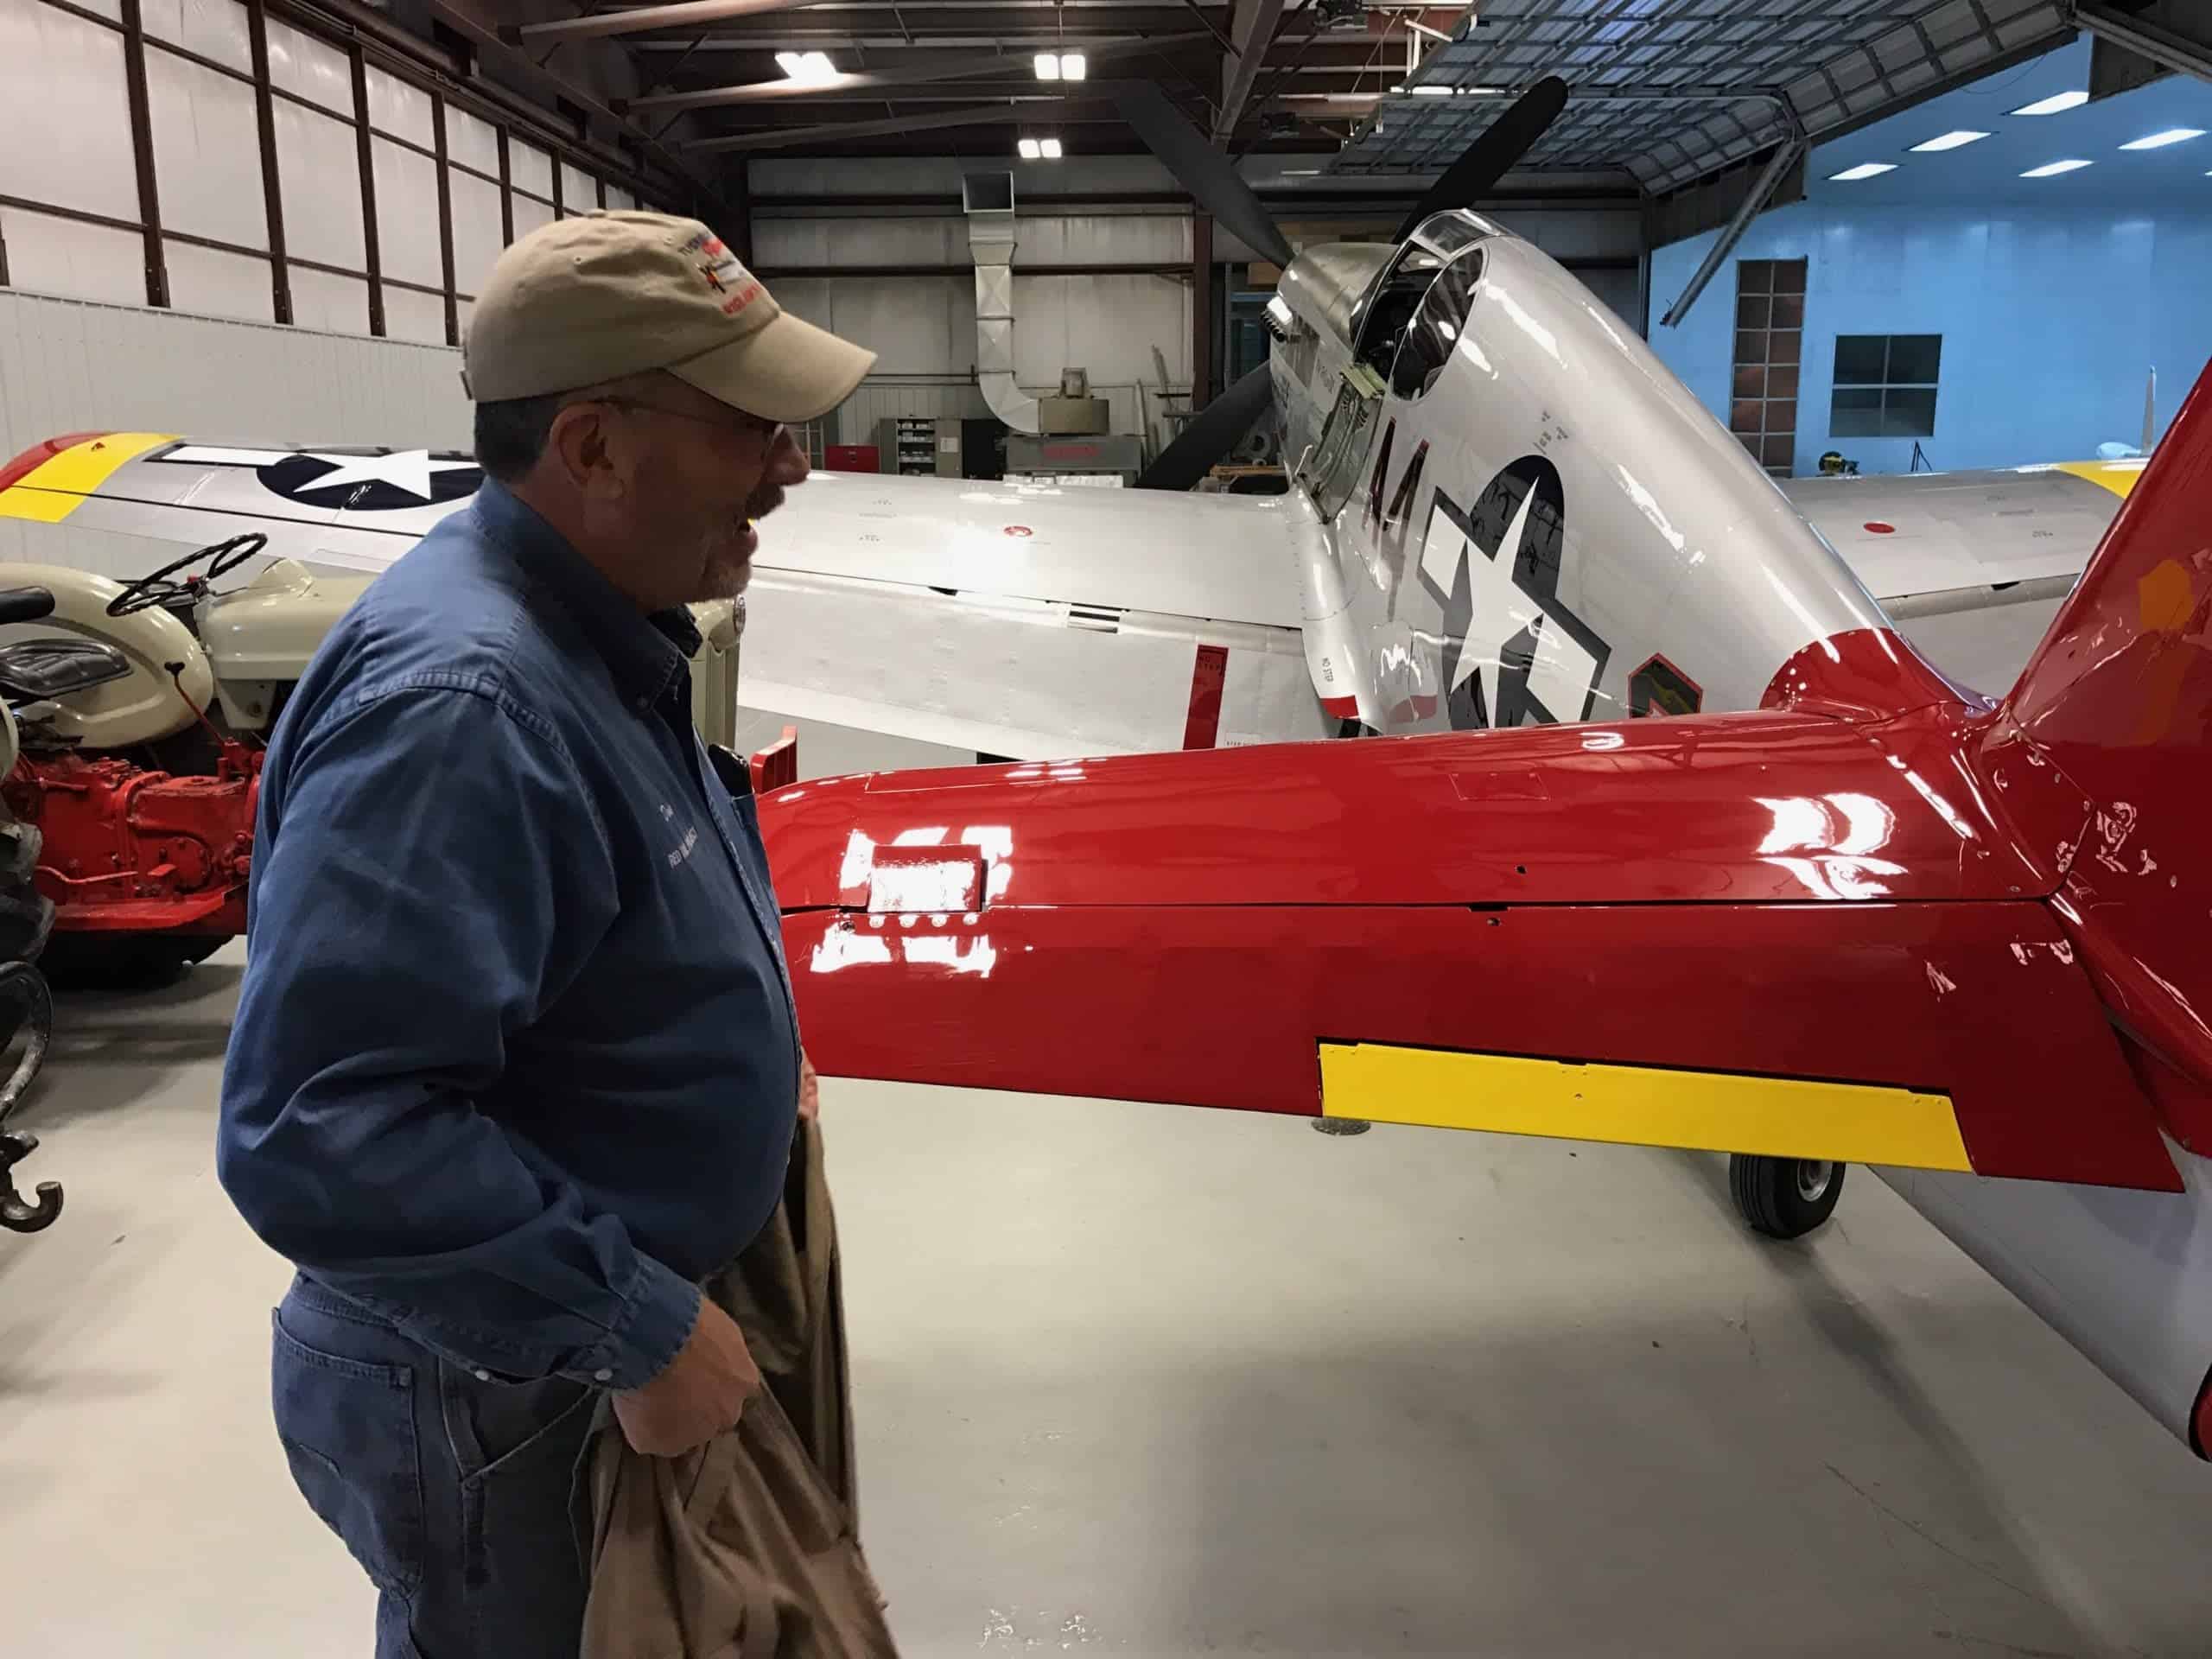 Pilot Doug Rozendaal makes one last inspection of the P-51C Mustang "Tuskegee Airmen" today before taking final delivery of the aircraft.